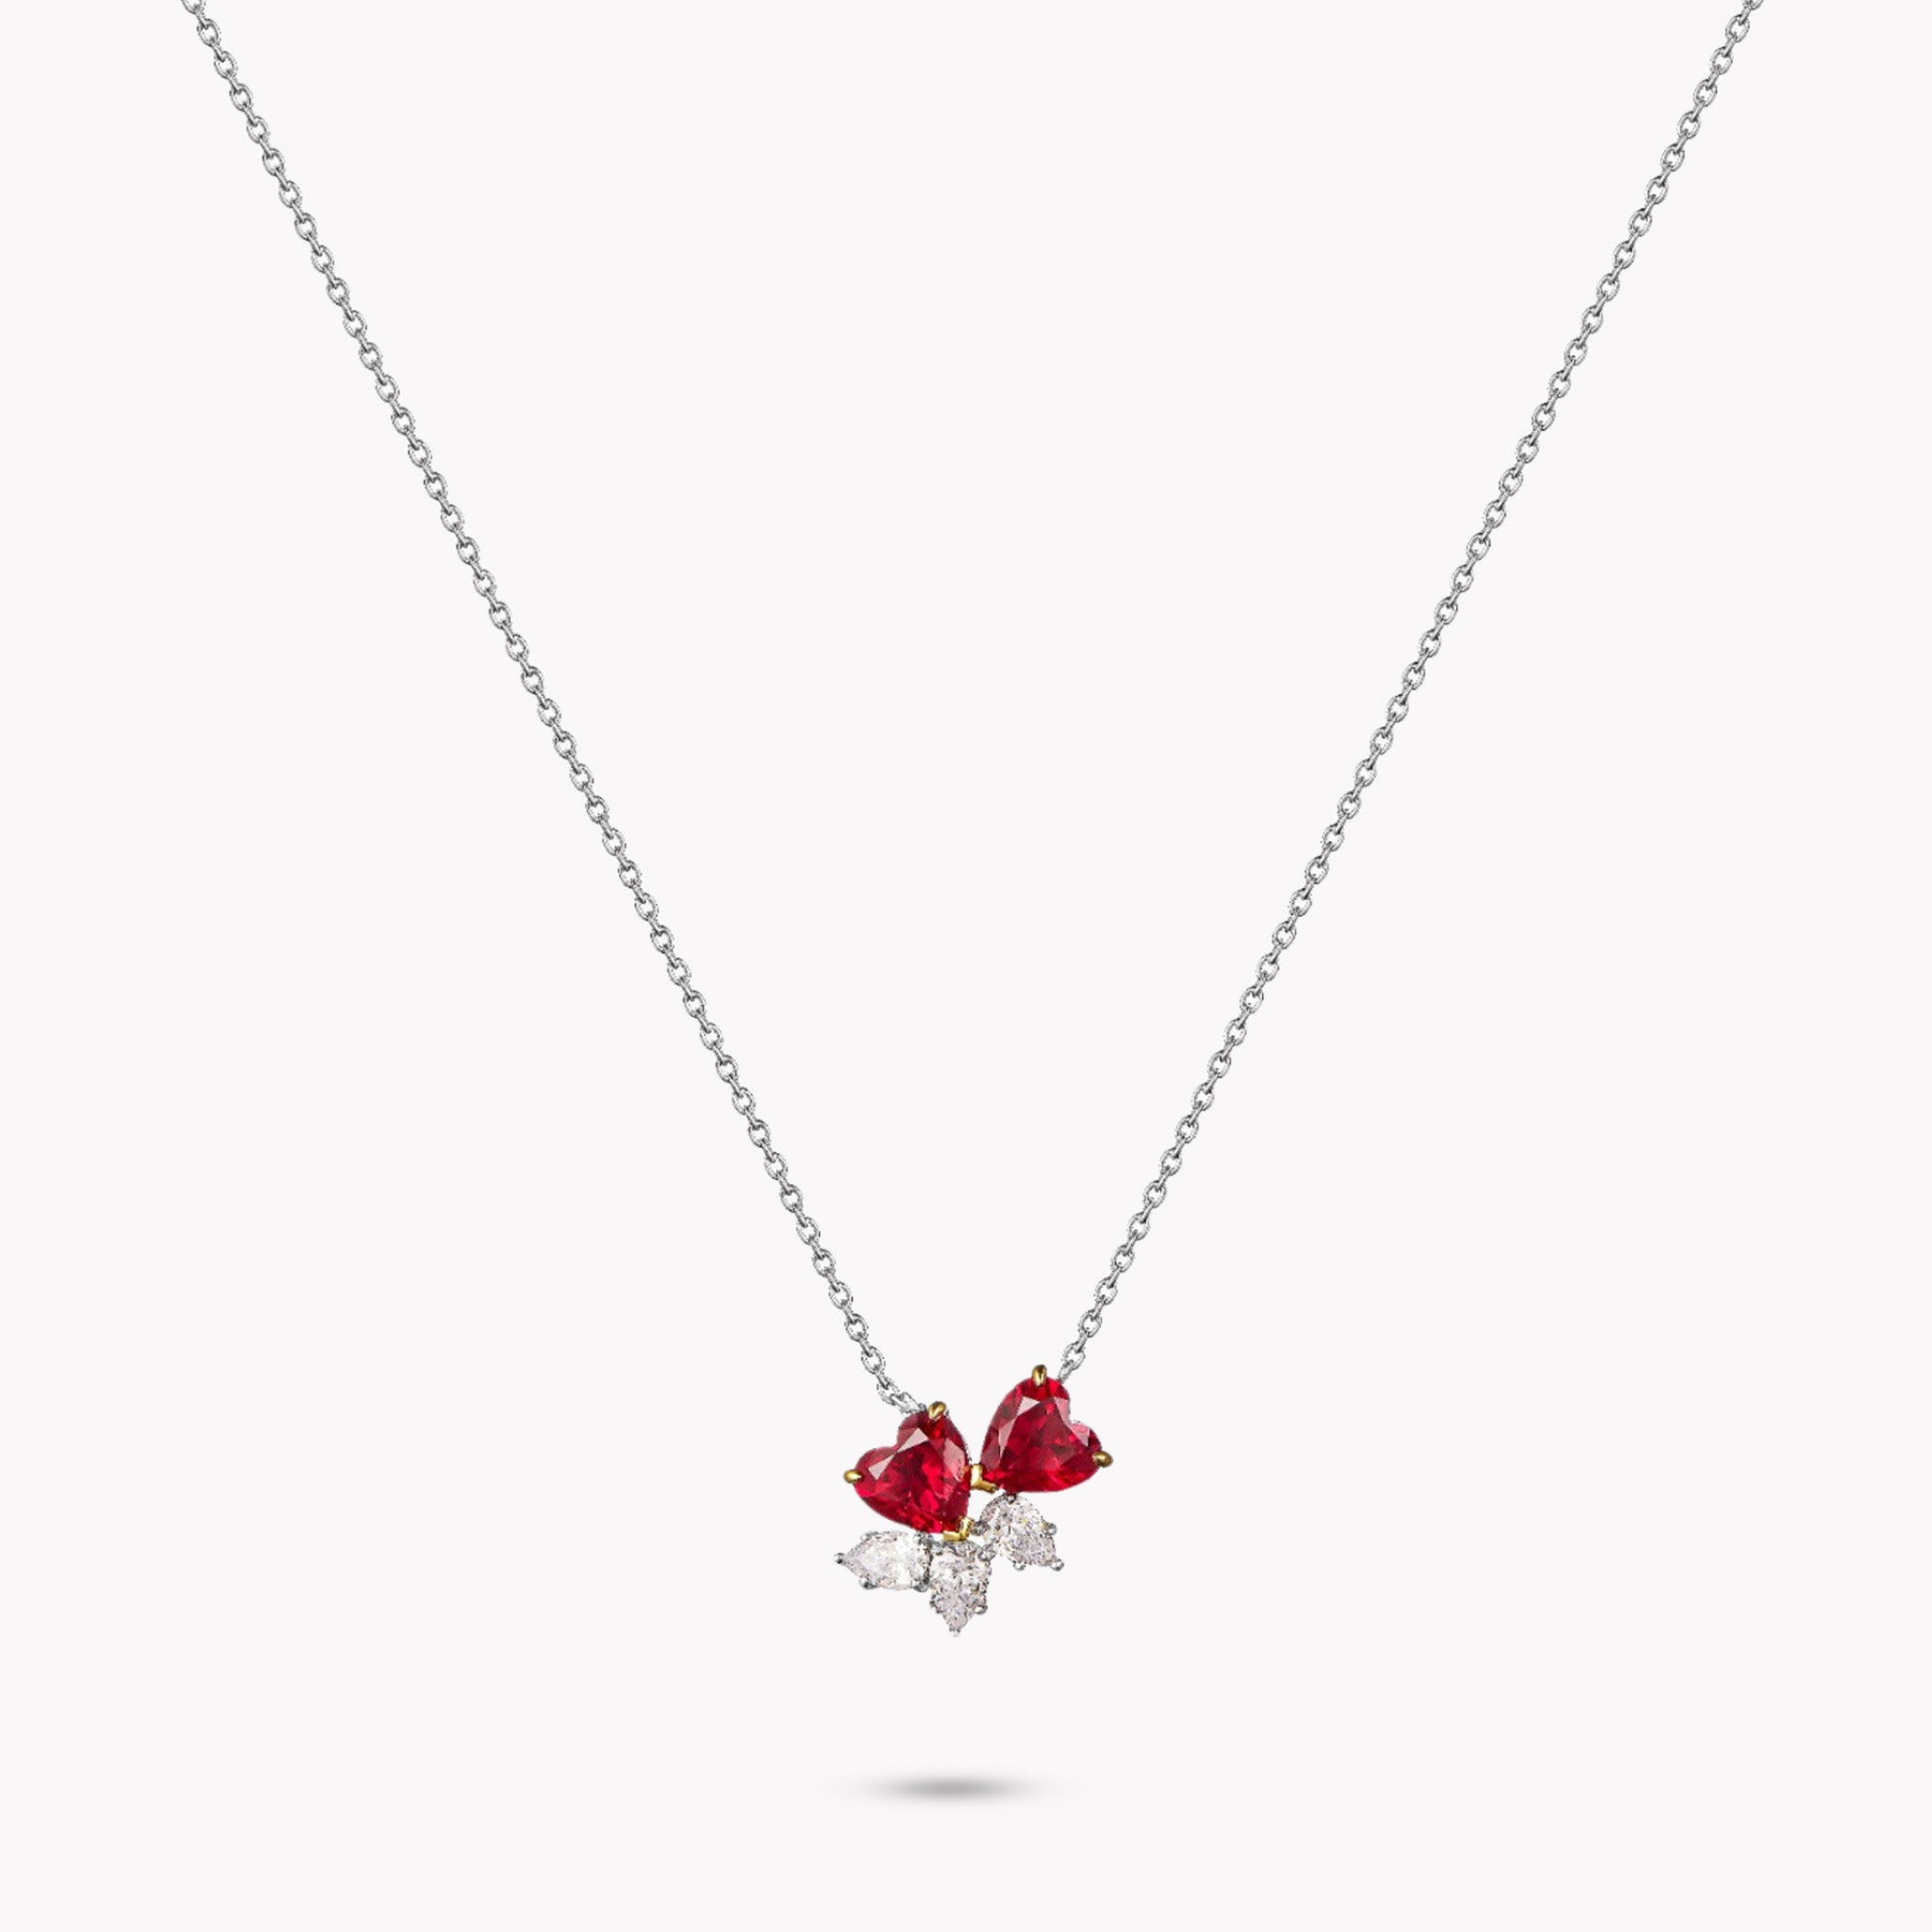 Fancy Love Pendent with Heart Shape Created Rubies & White Pear Simulated Diamonds